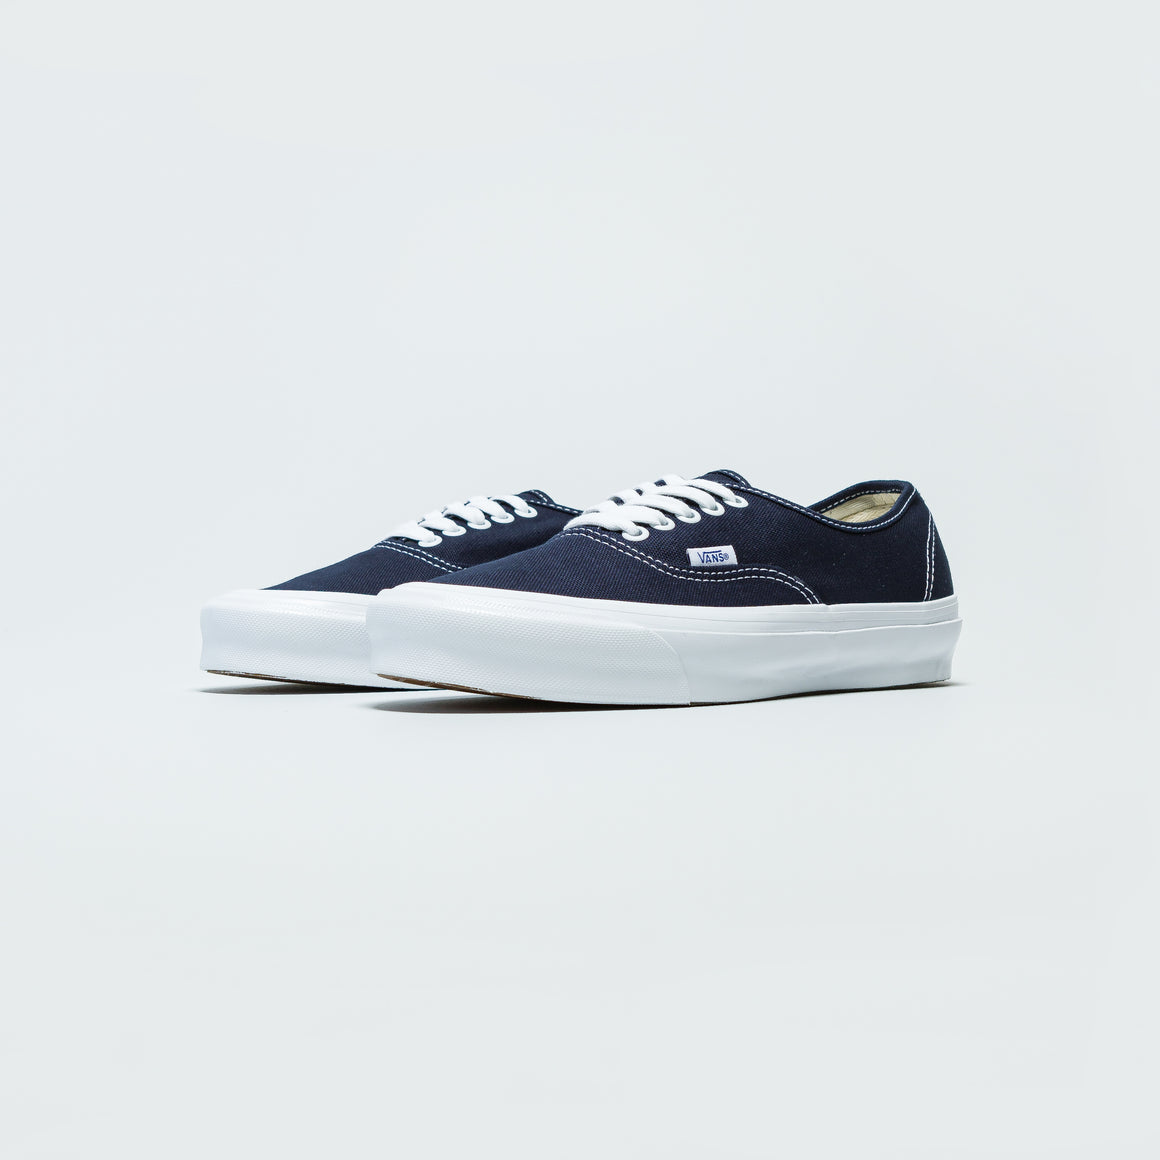 Vans - OG Authentic LX - Navy - UP THERE